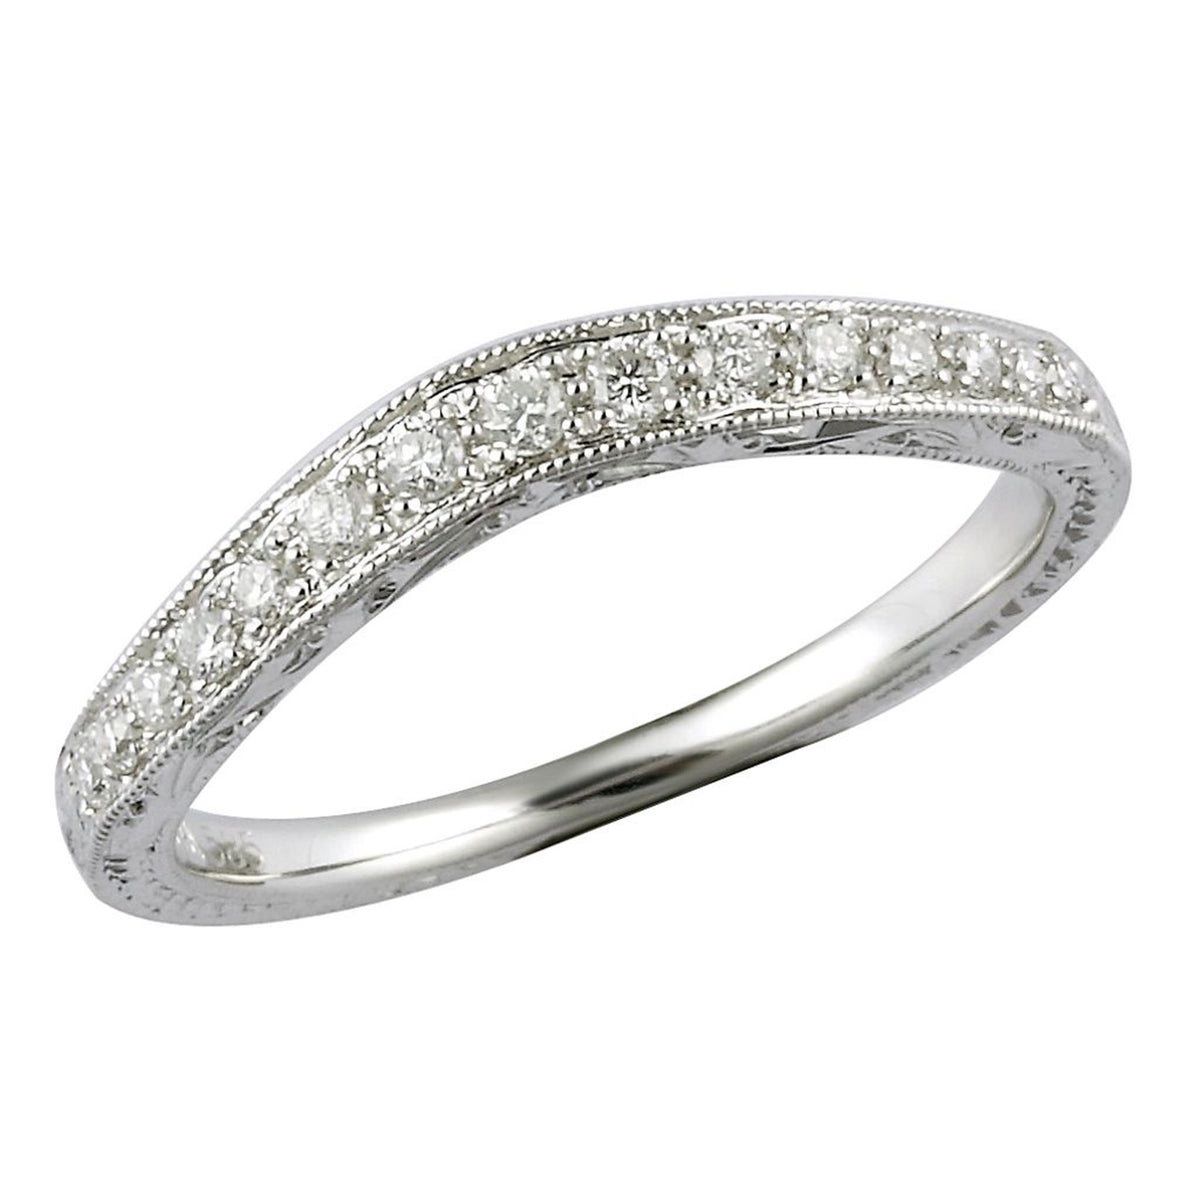 14Kt White Gold Curved Wedding Ring With 0.16cttw Natural Diamonds